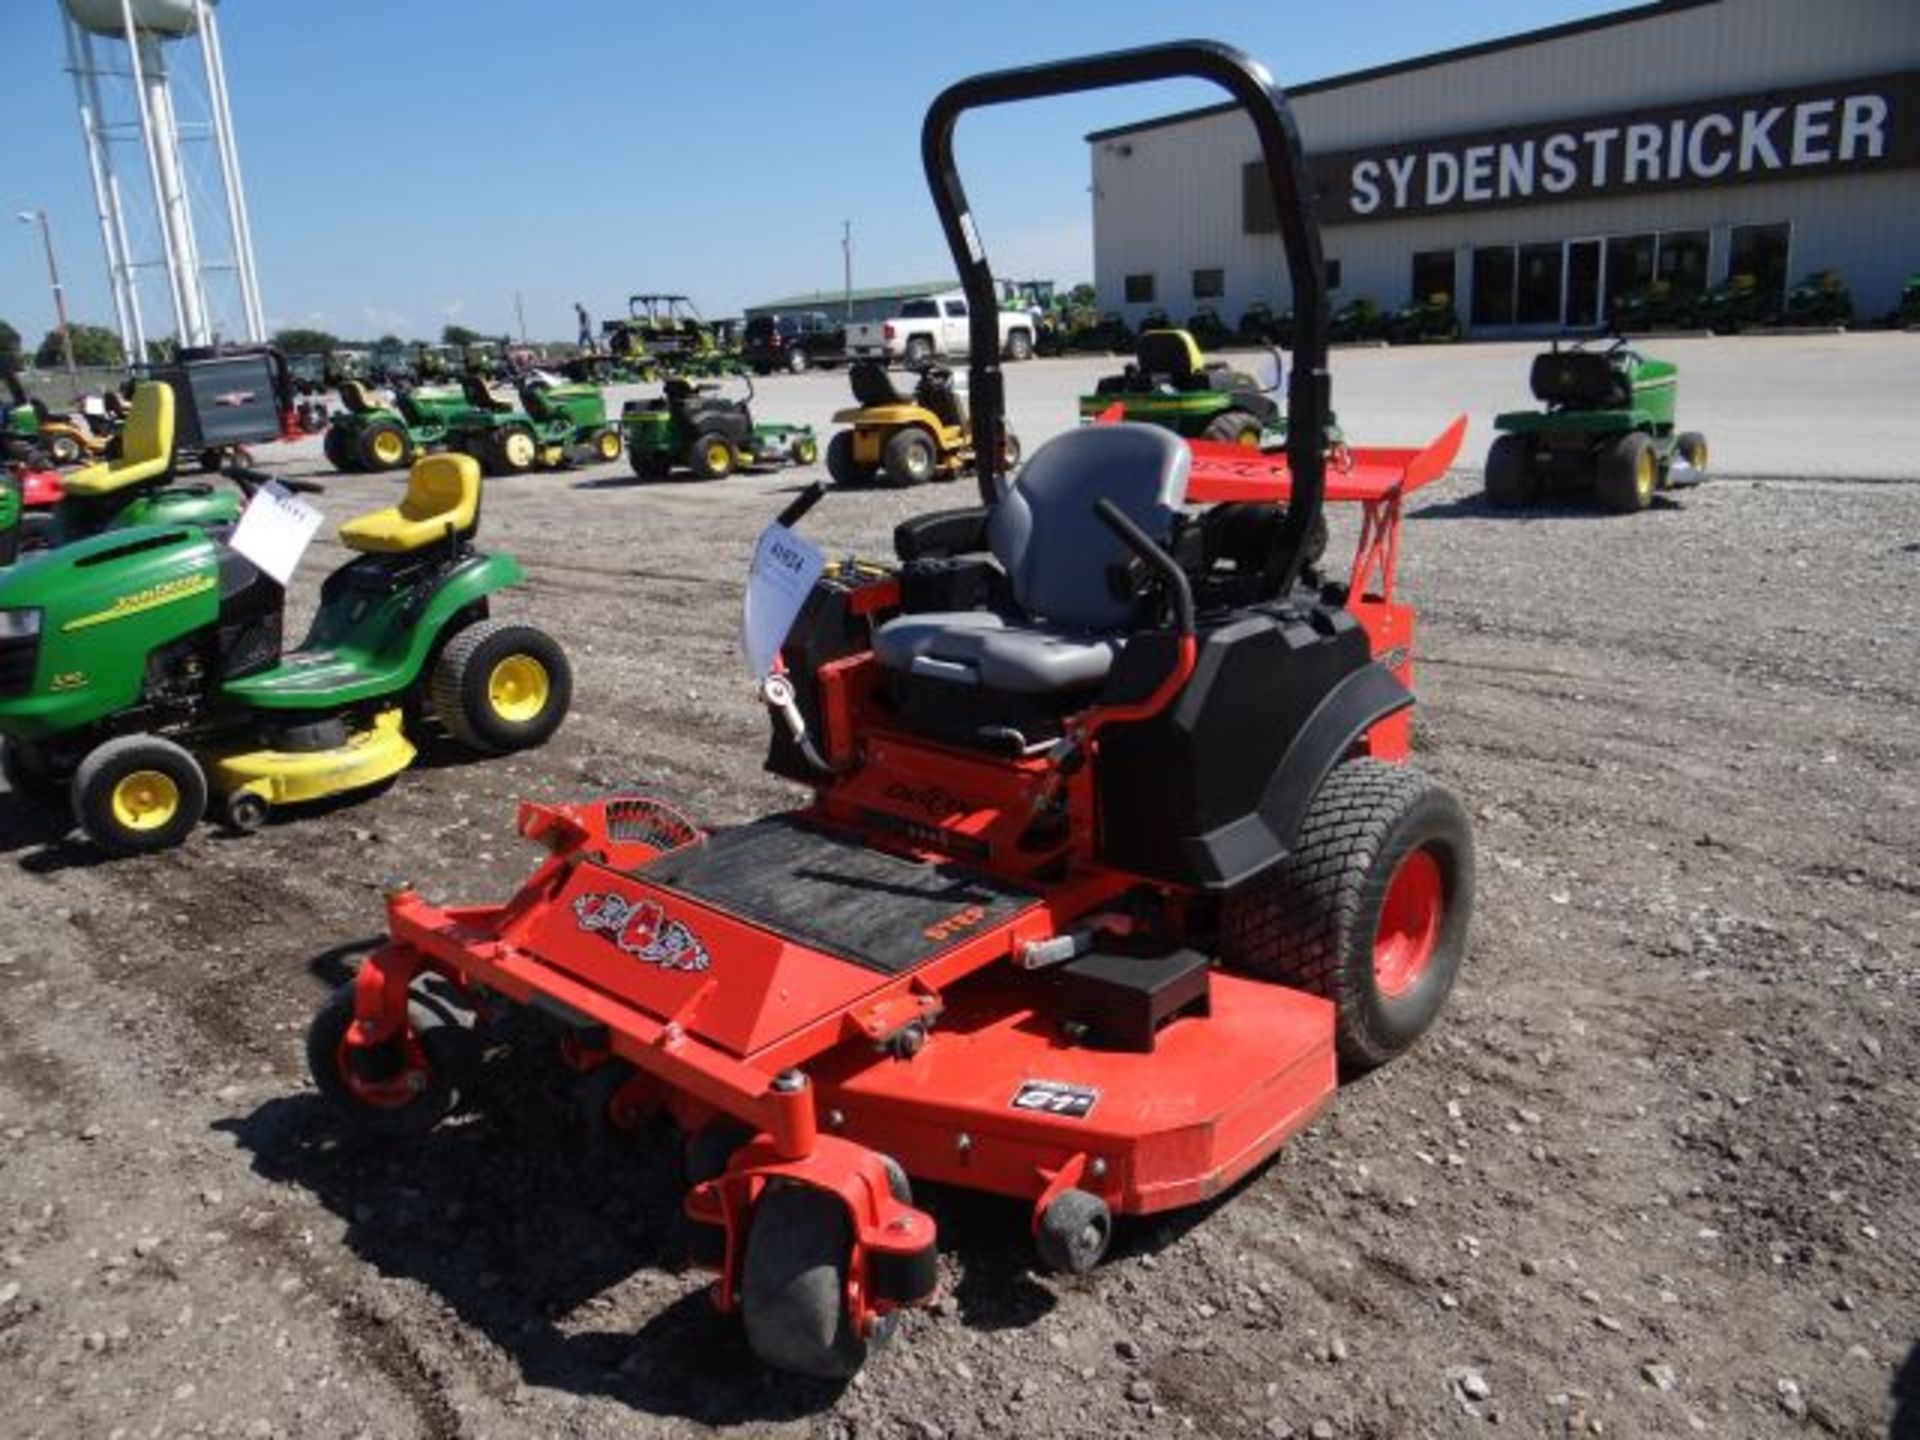 Lot 41024 - 2013 Bad Boy Outlaw 6100 Zero Turn Mower 107 hrs, 36hp, Briggs, Air Cooled, 61" Deck, - Image 2 of 4